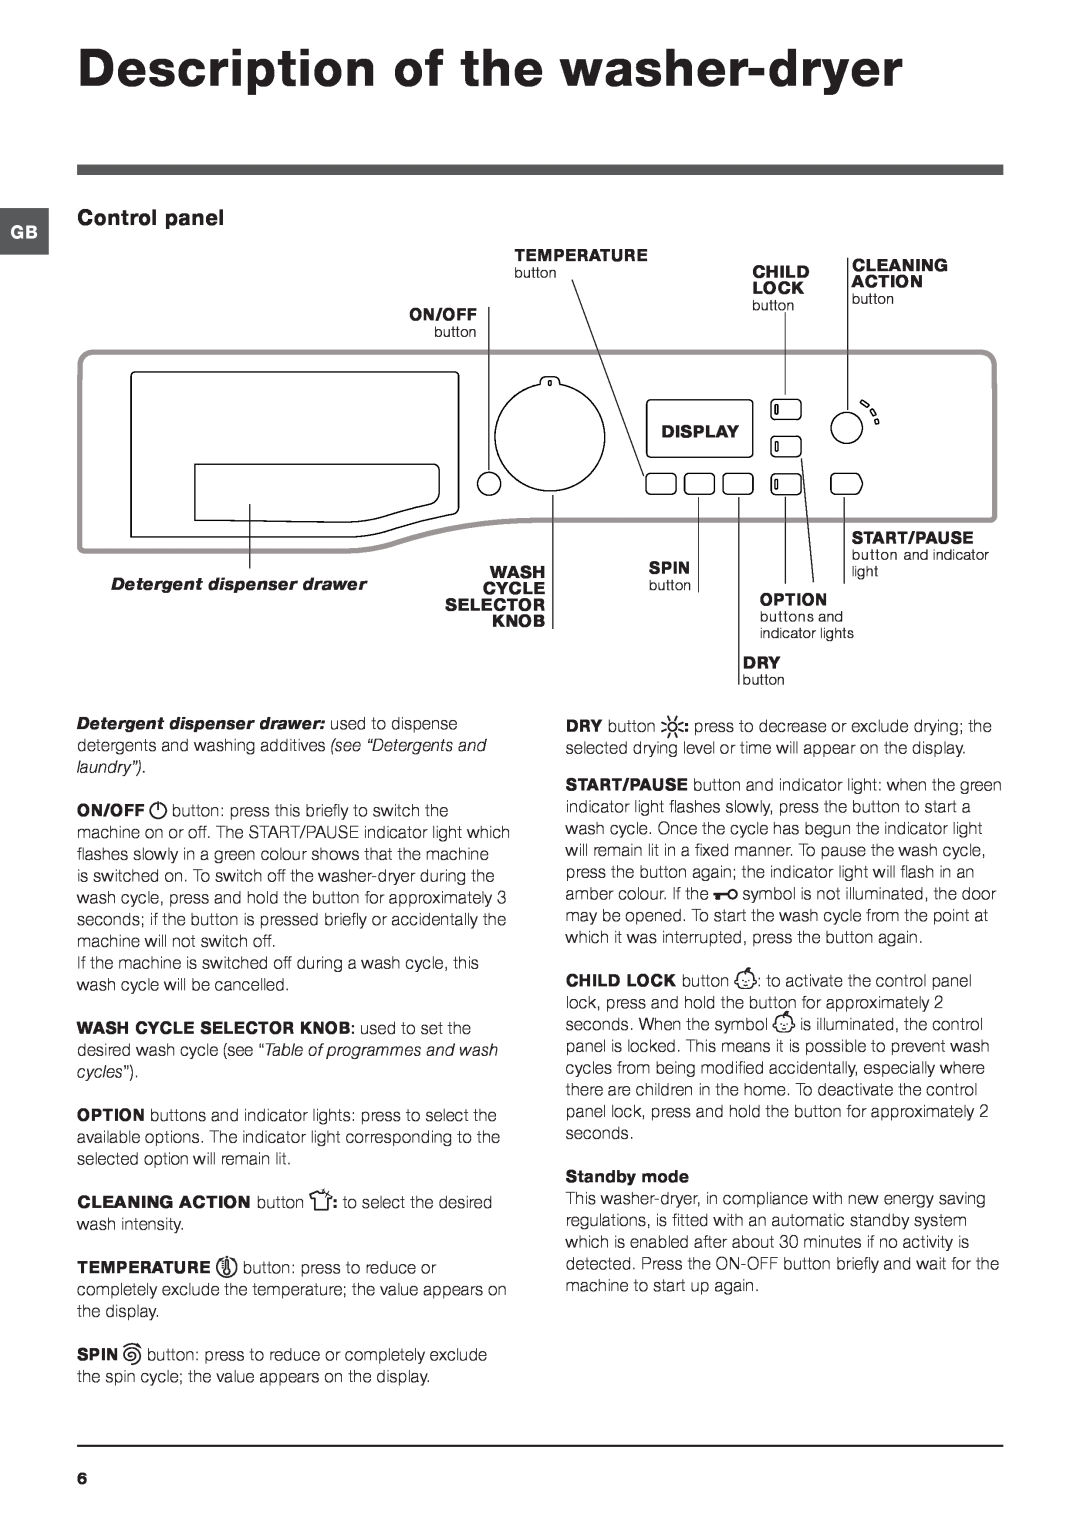 Hotpoint WDPG Description of the washer-dryer, Control panel, Detergent dispenser drawerCYCLE SELECTOR KNOB 